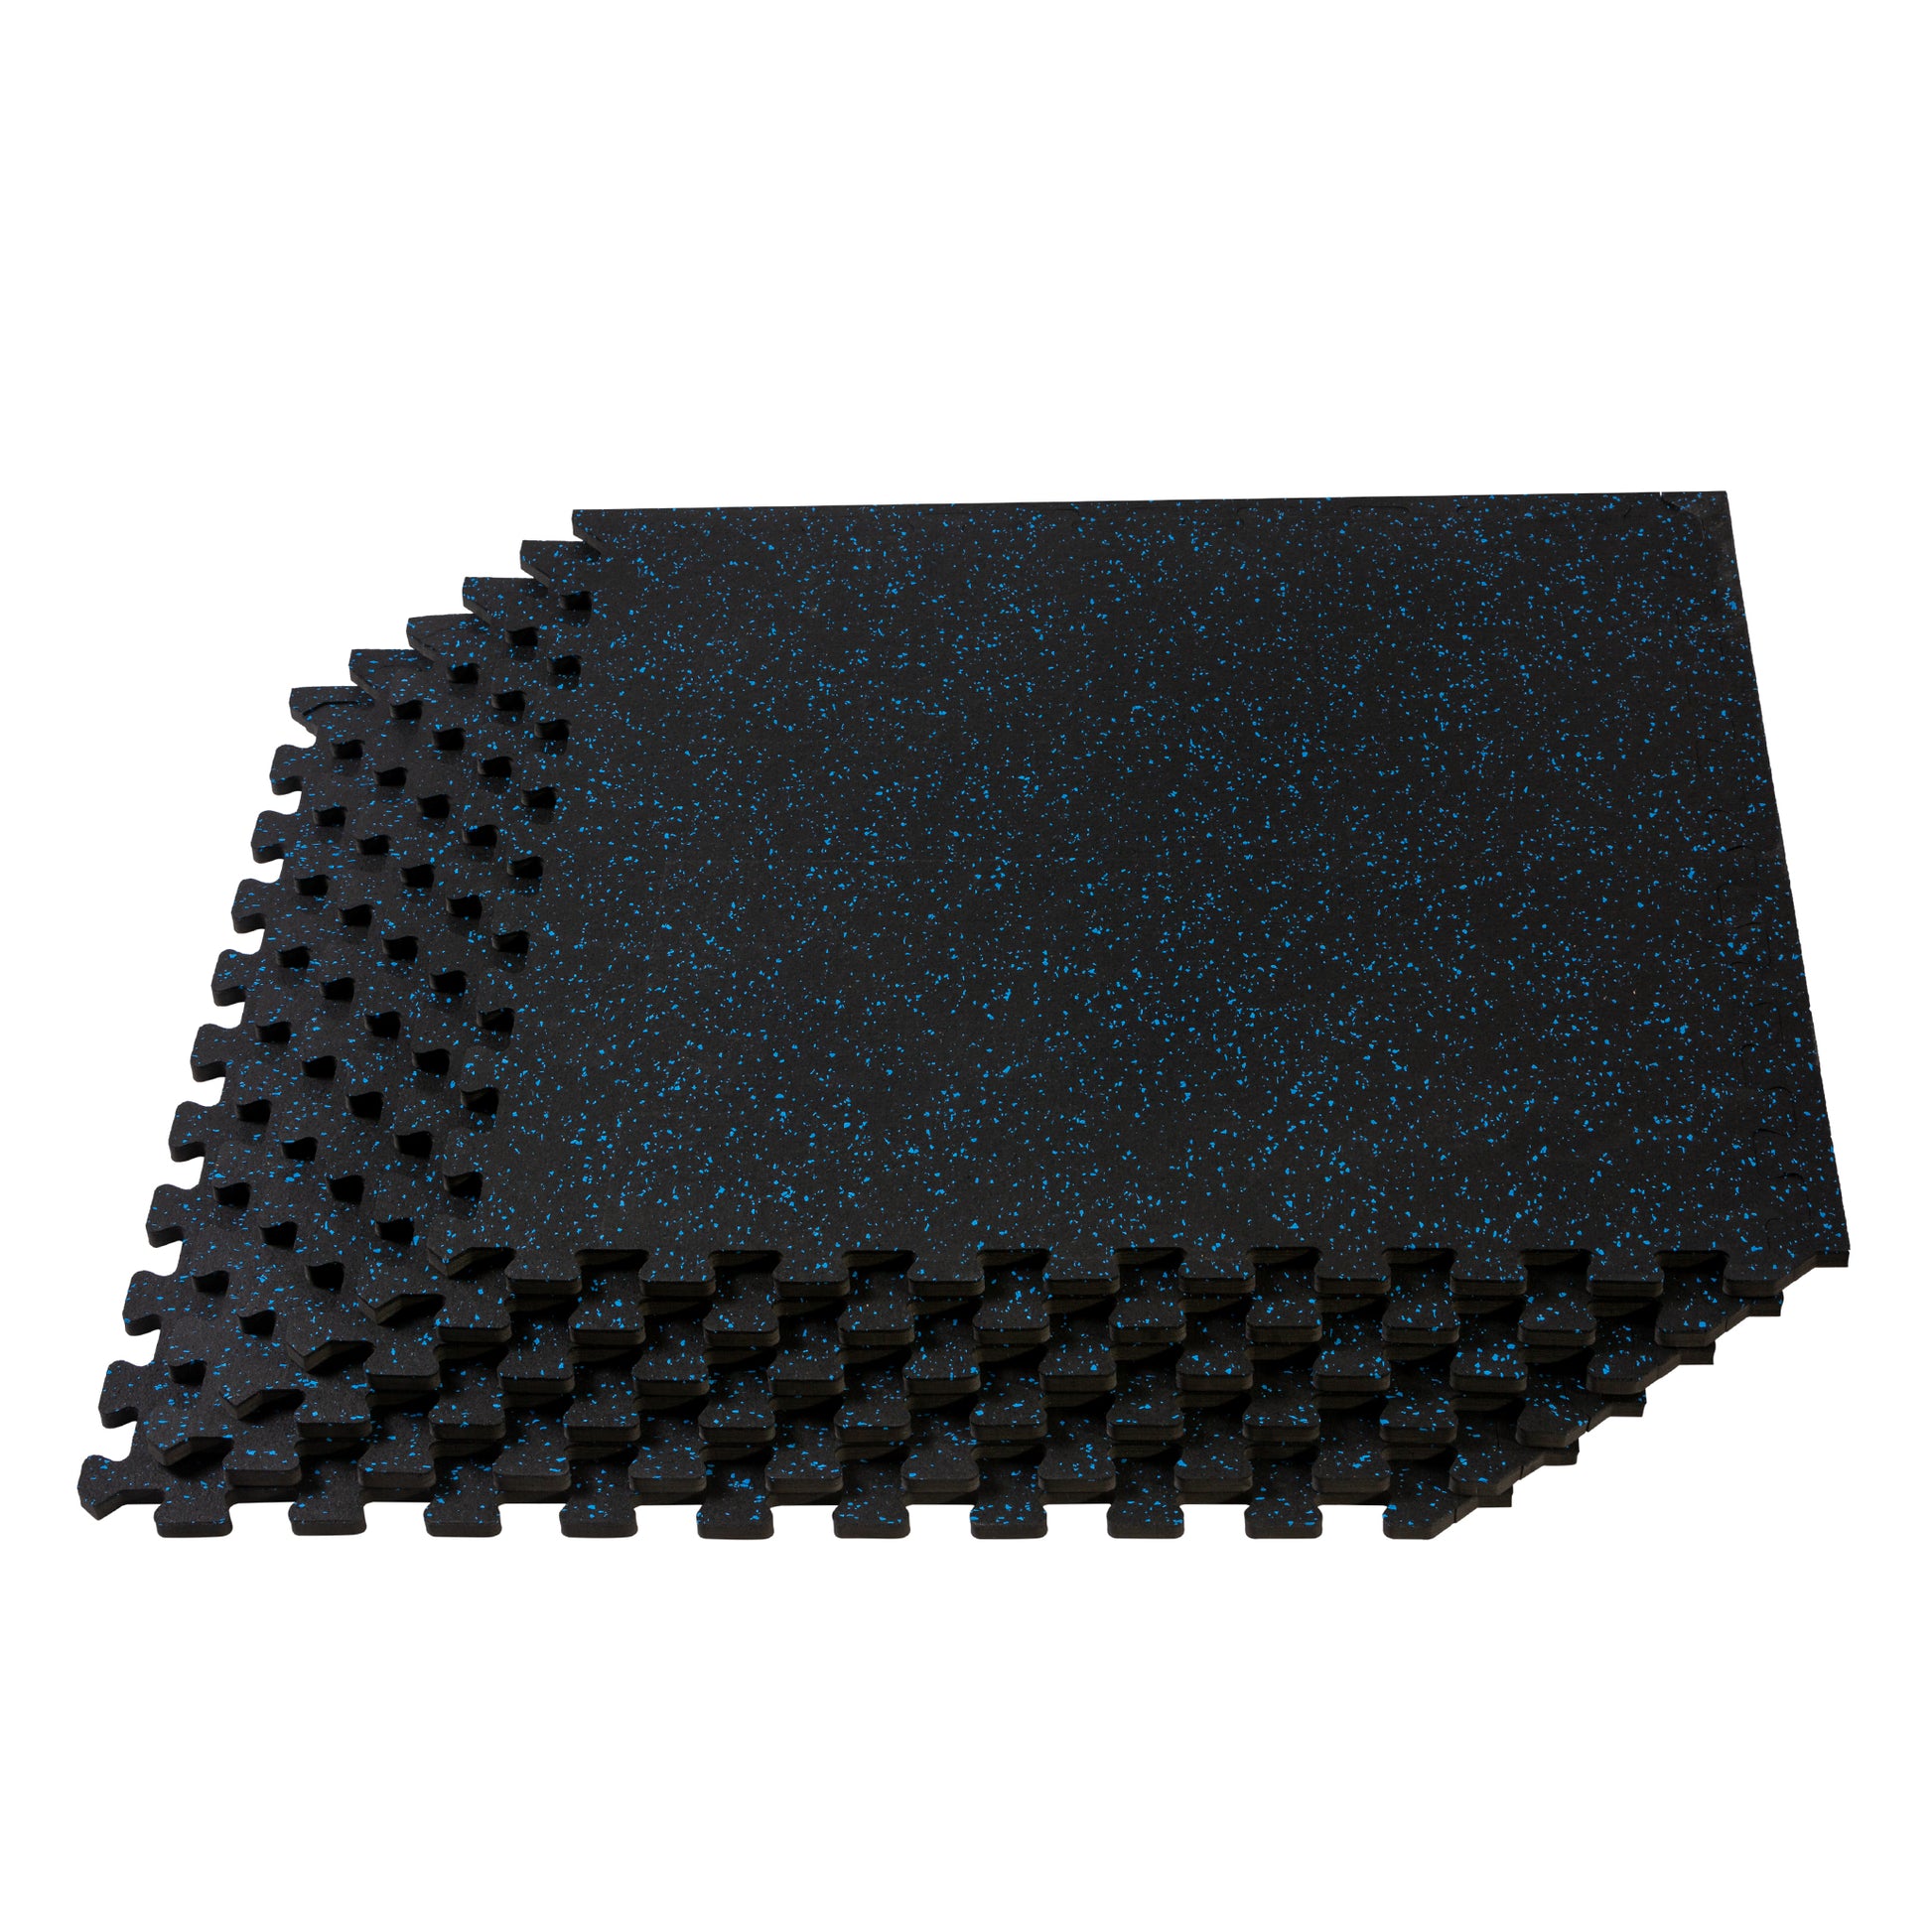 Velotas rubber-topped fitness mats stacked